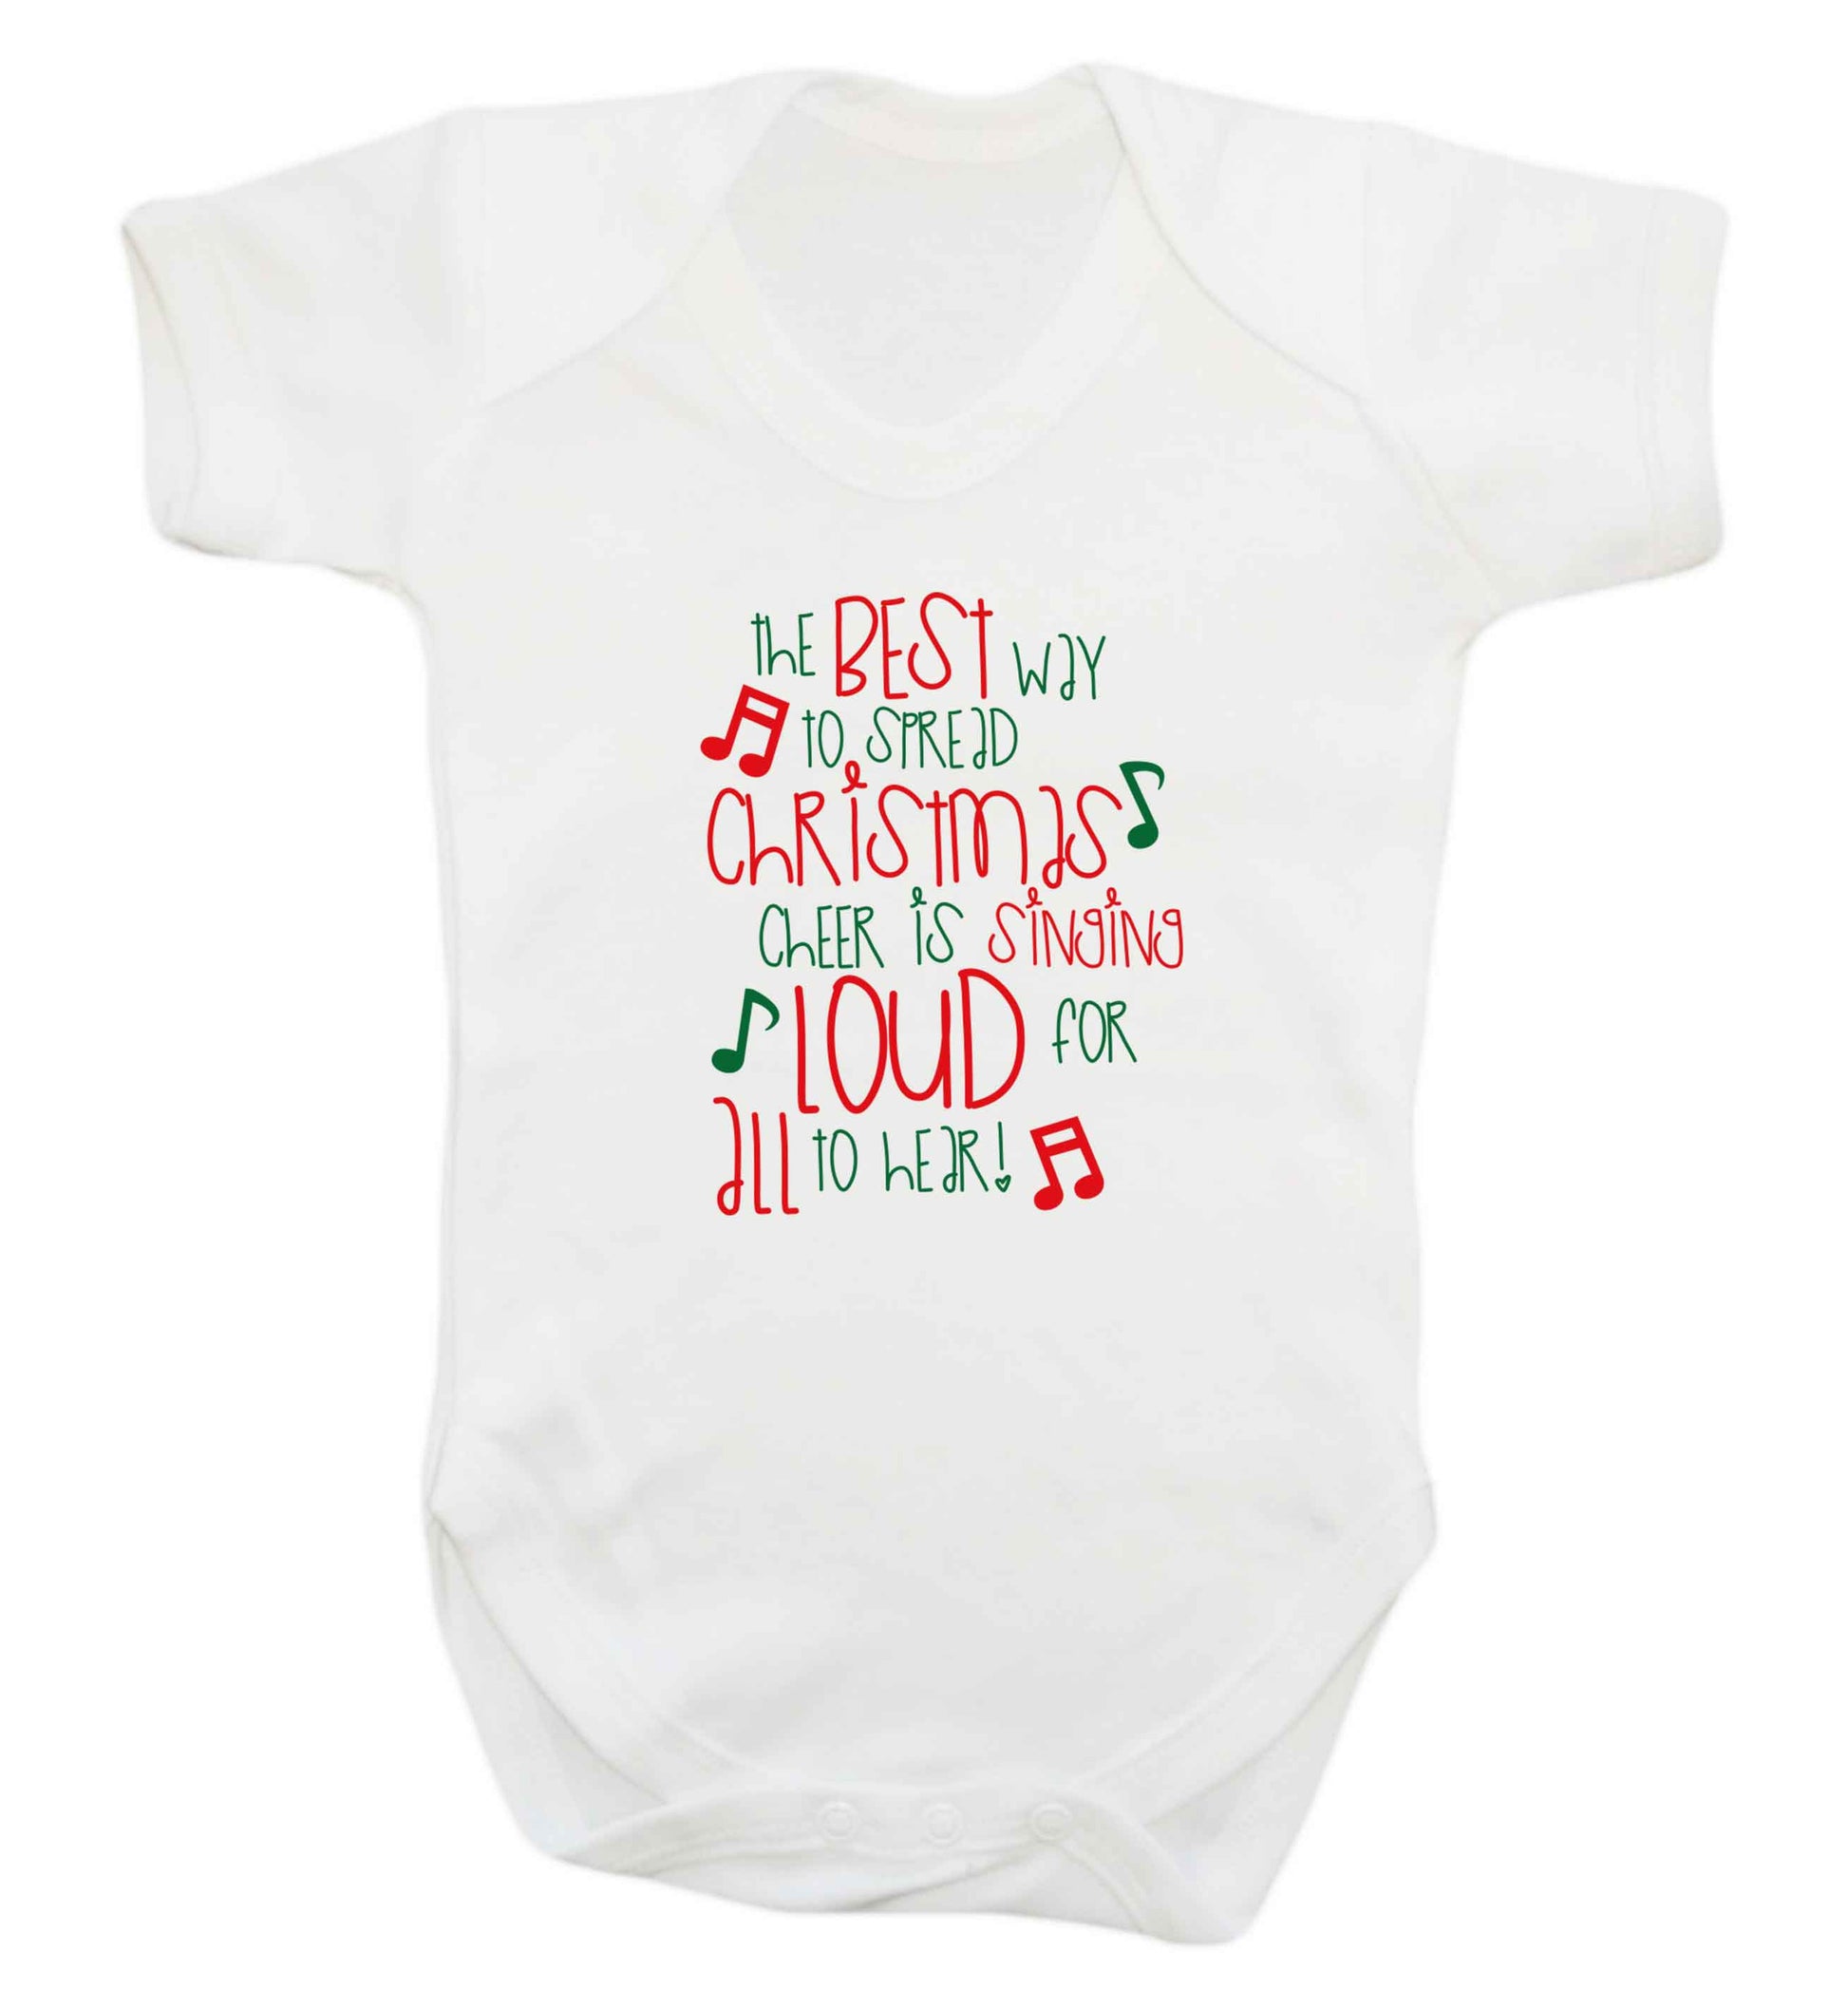 The best way to spread Christmas cheer is singing loud for all to hear baby vest white 18-24 months